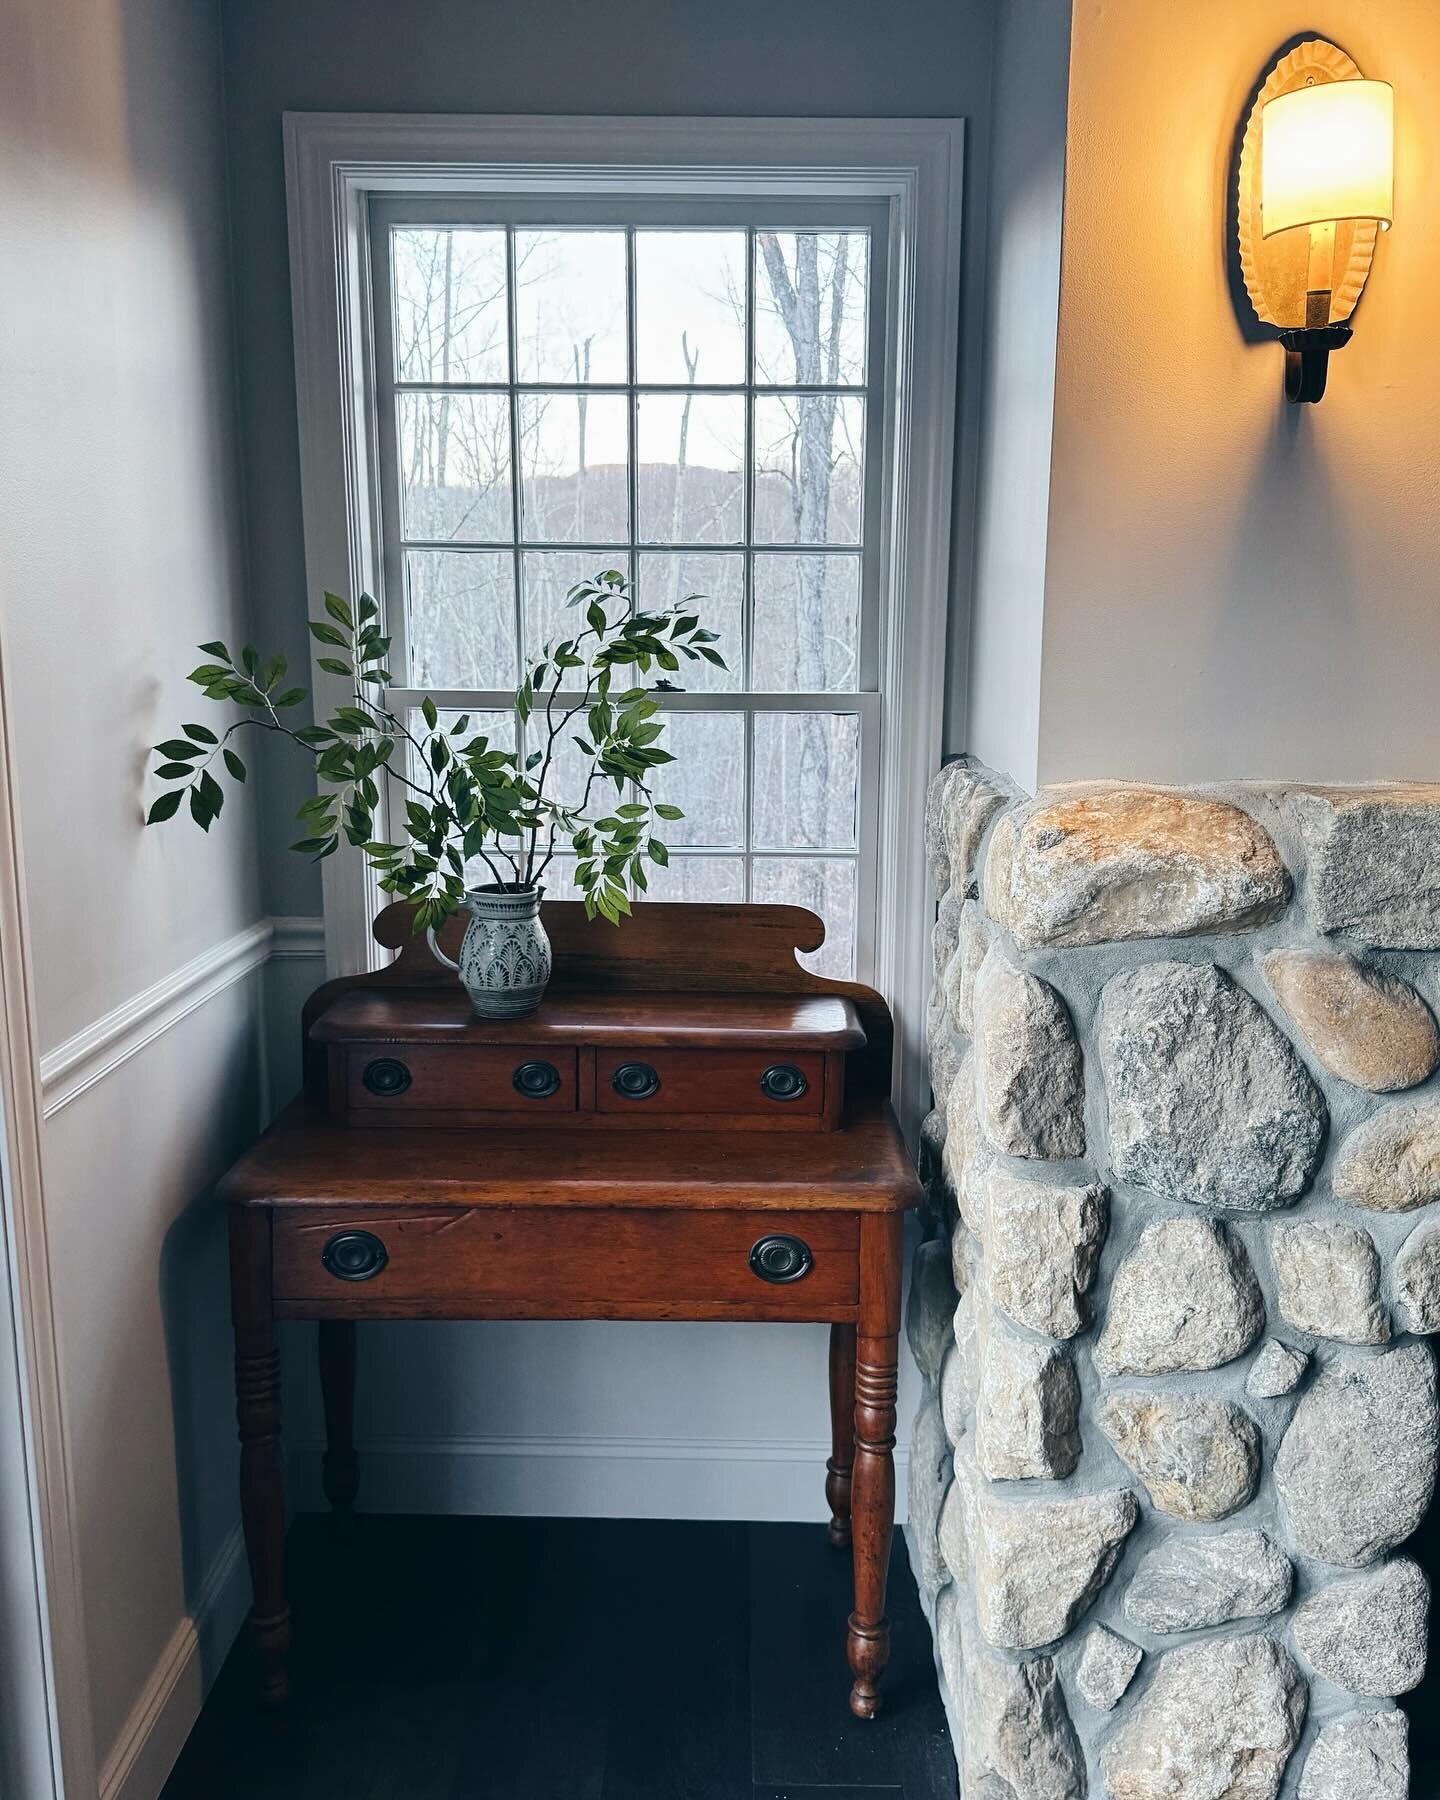 This sweet moment.
.
.&rsquo;.
#lostfoxinn #litchfield #vignette #antiquelover #vintagehome #vintagehomedecor #oldmeetsnew #cottagecore #colonialhouse